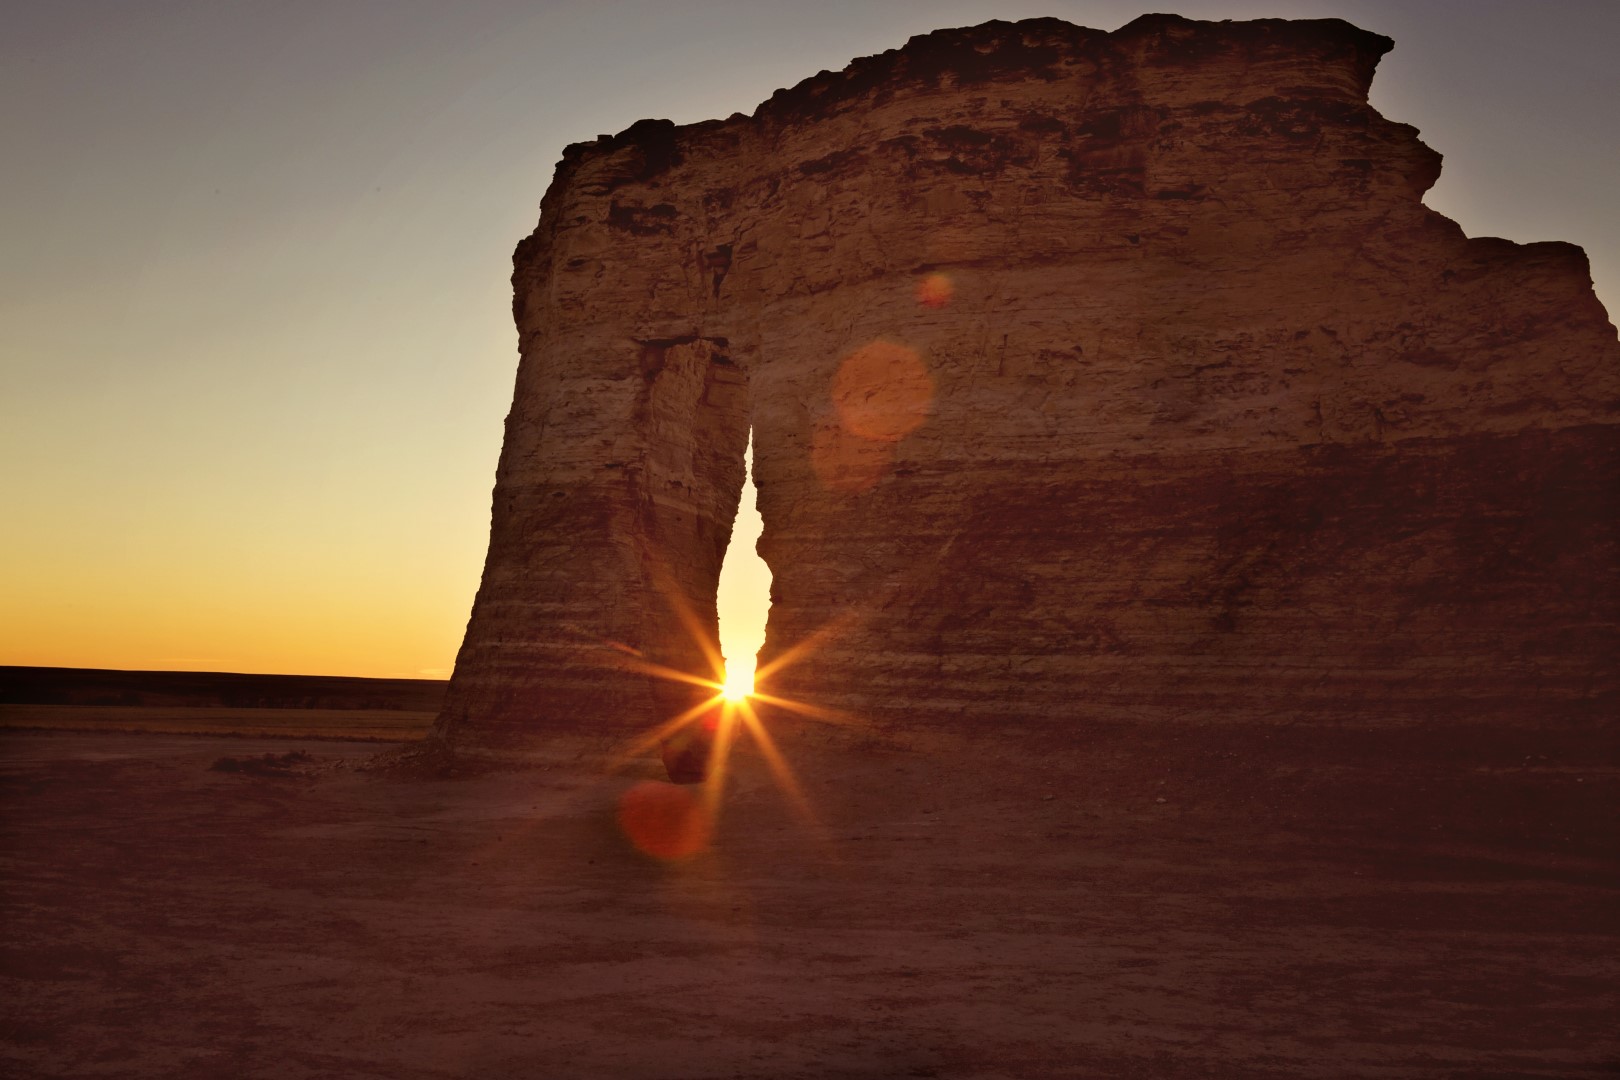 Sunset at Monument Rocks in Gove County Kansas